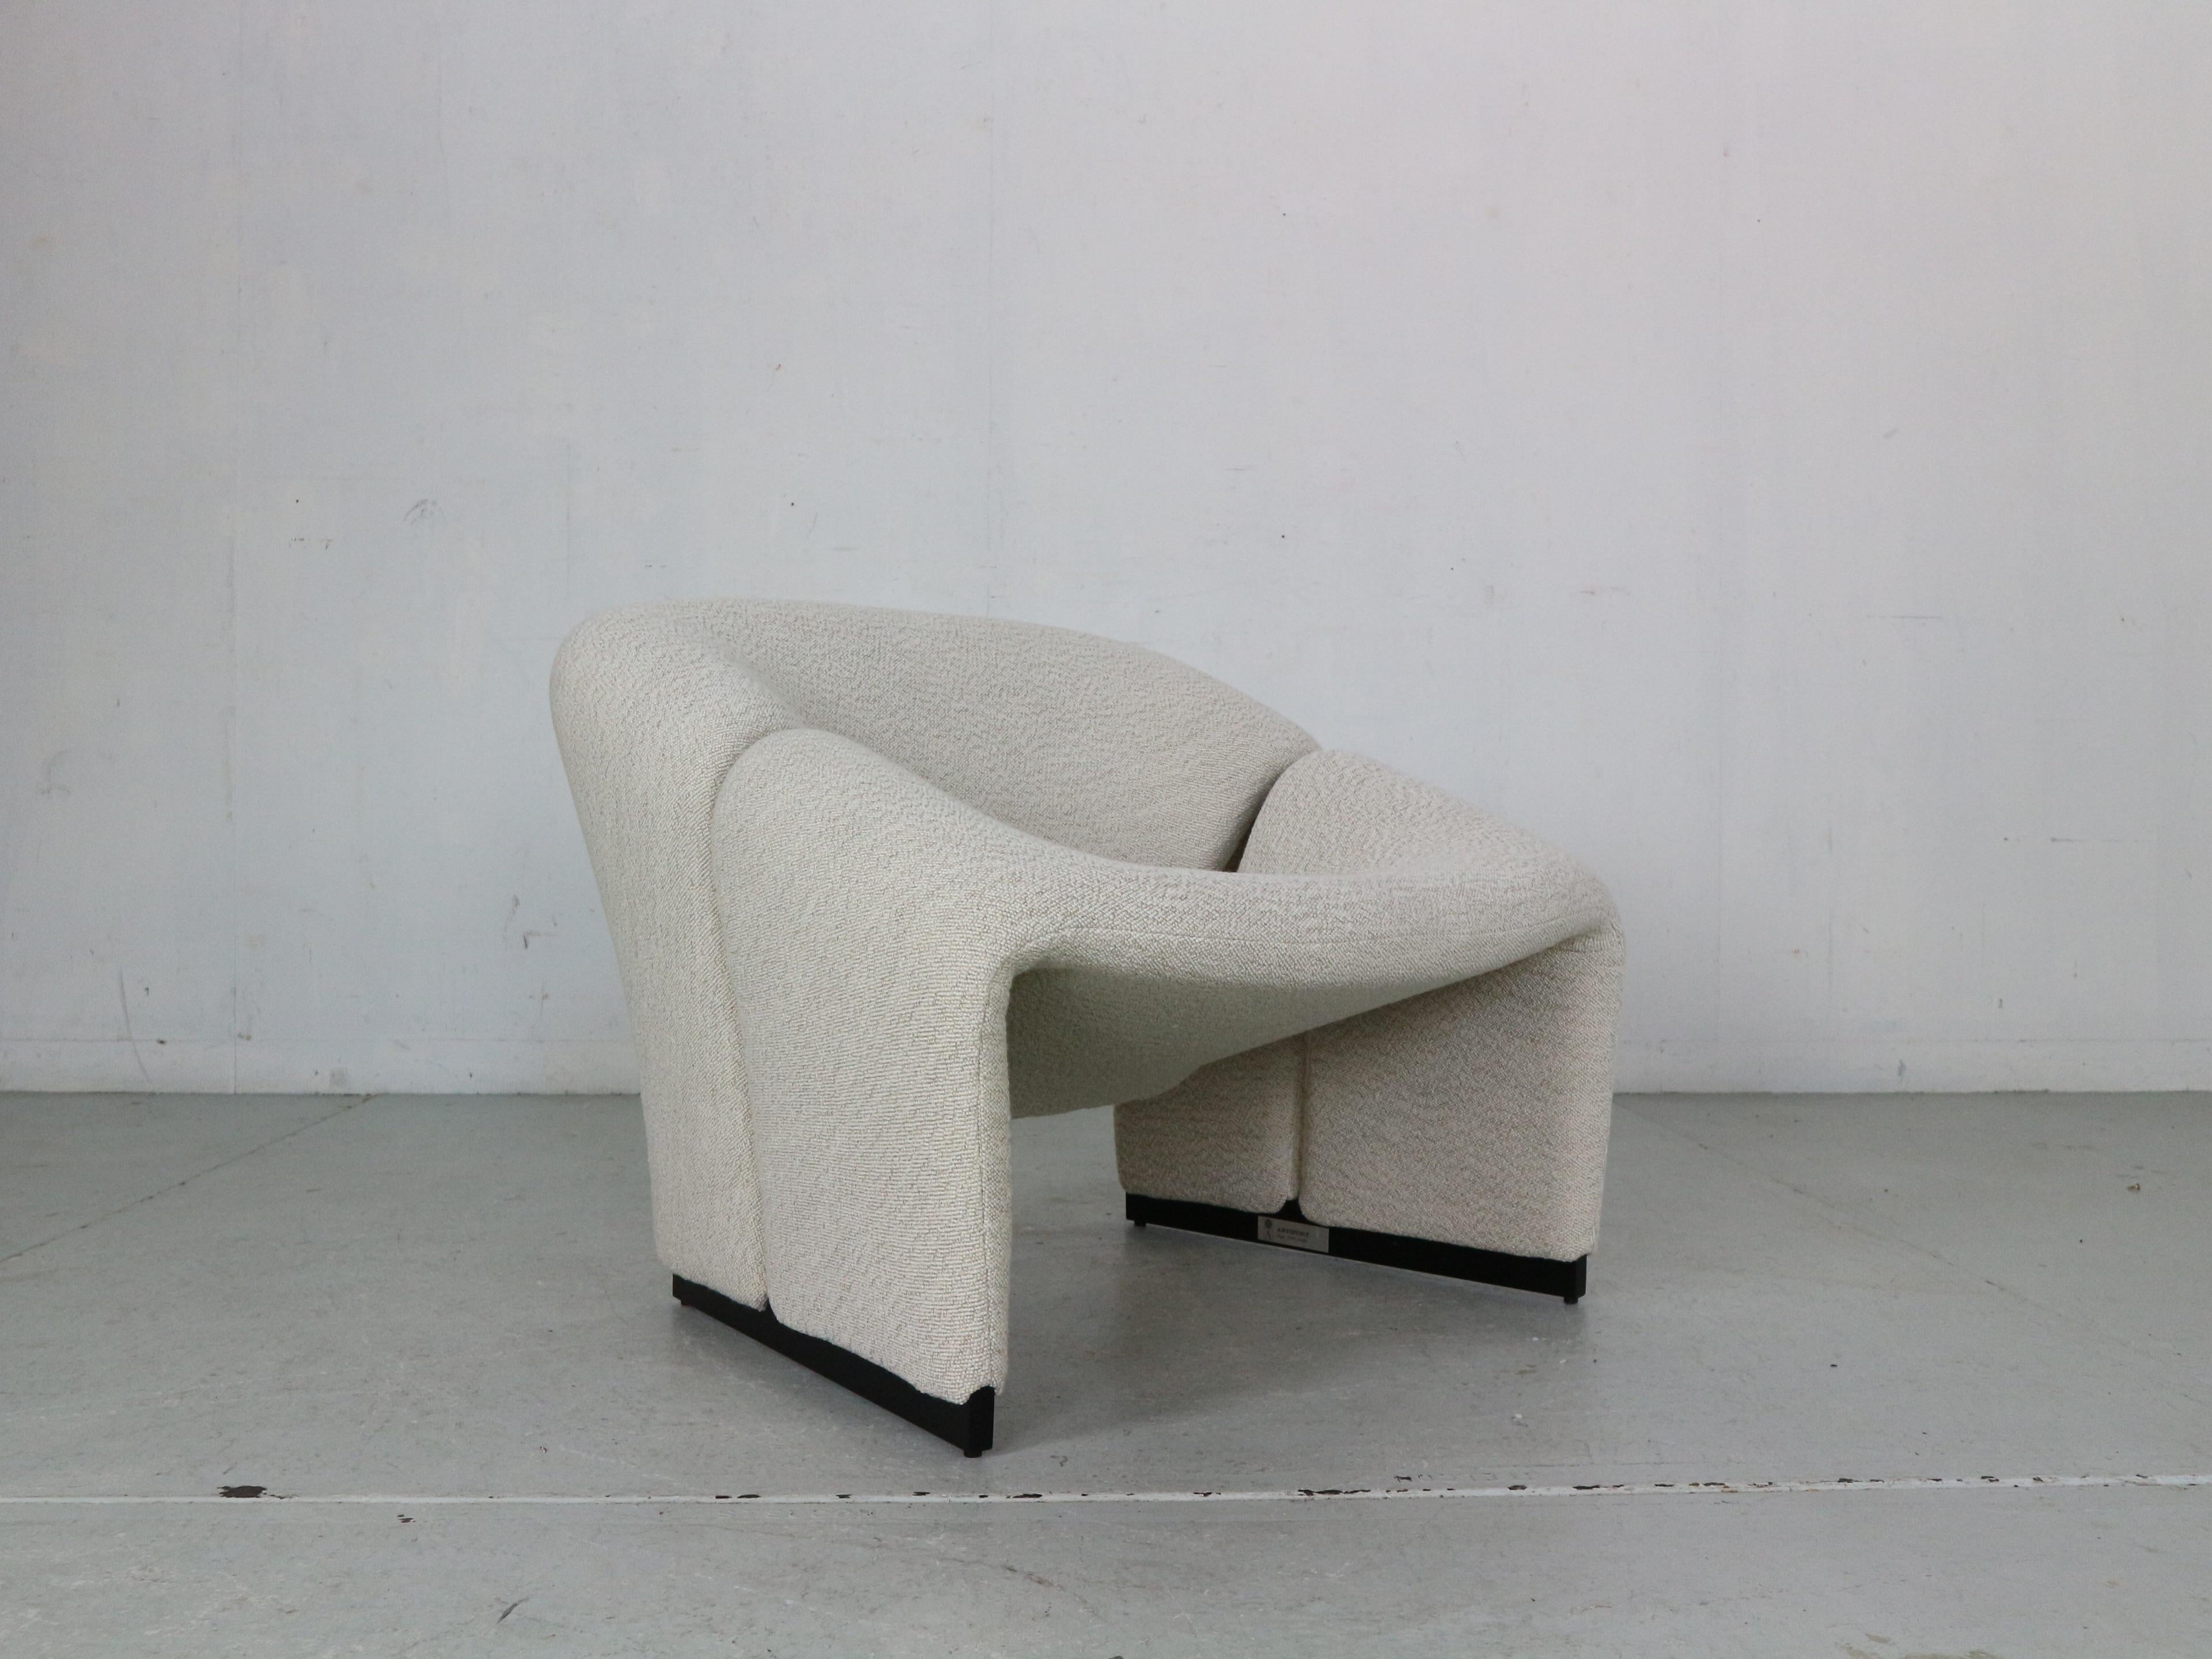 Groovy lounge chair designed by Pierre Paulin in 1972 and manufactured for Artifort, Holland.
Model No: F580, or also known as 